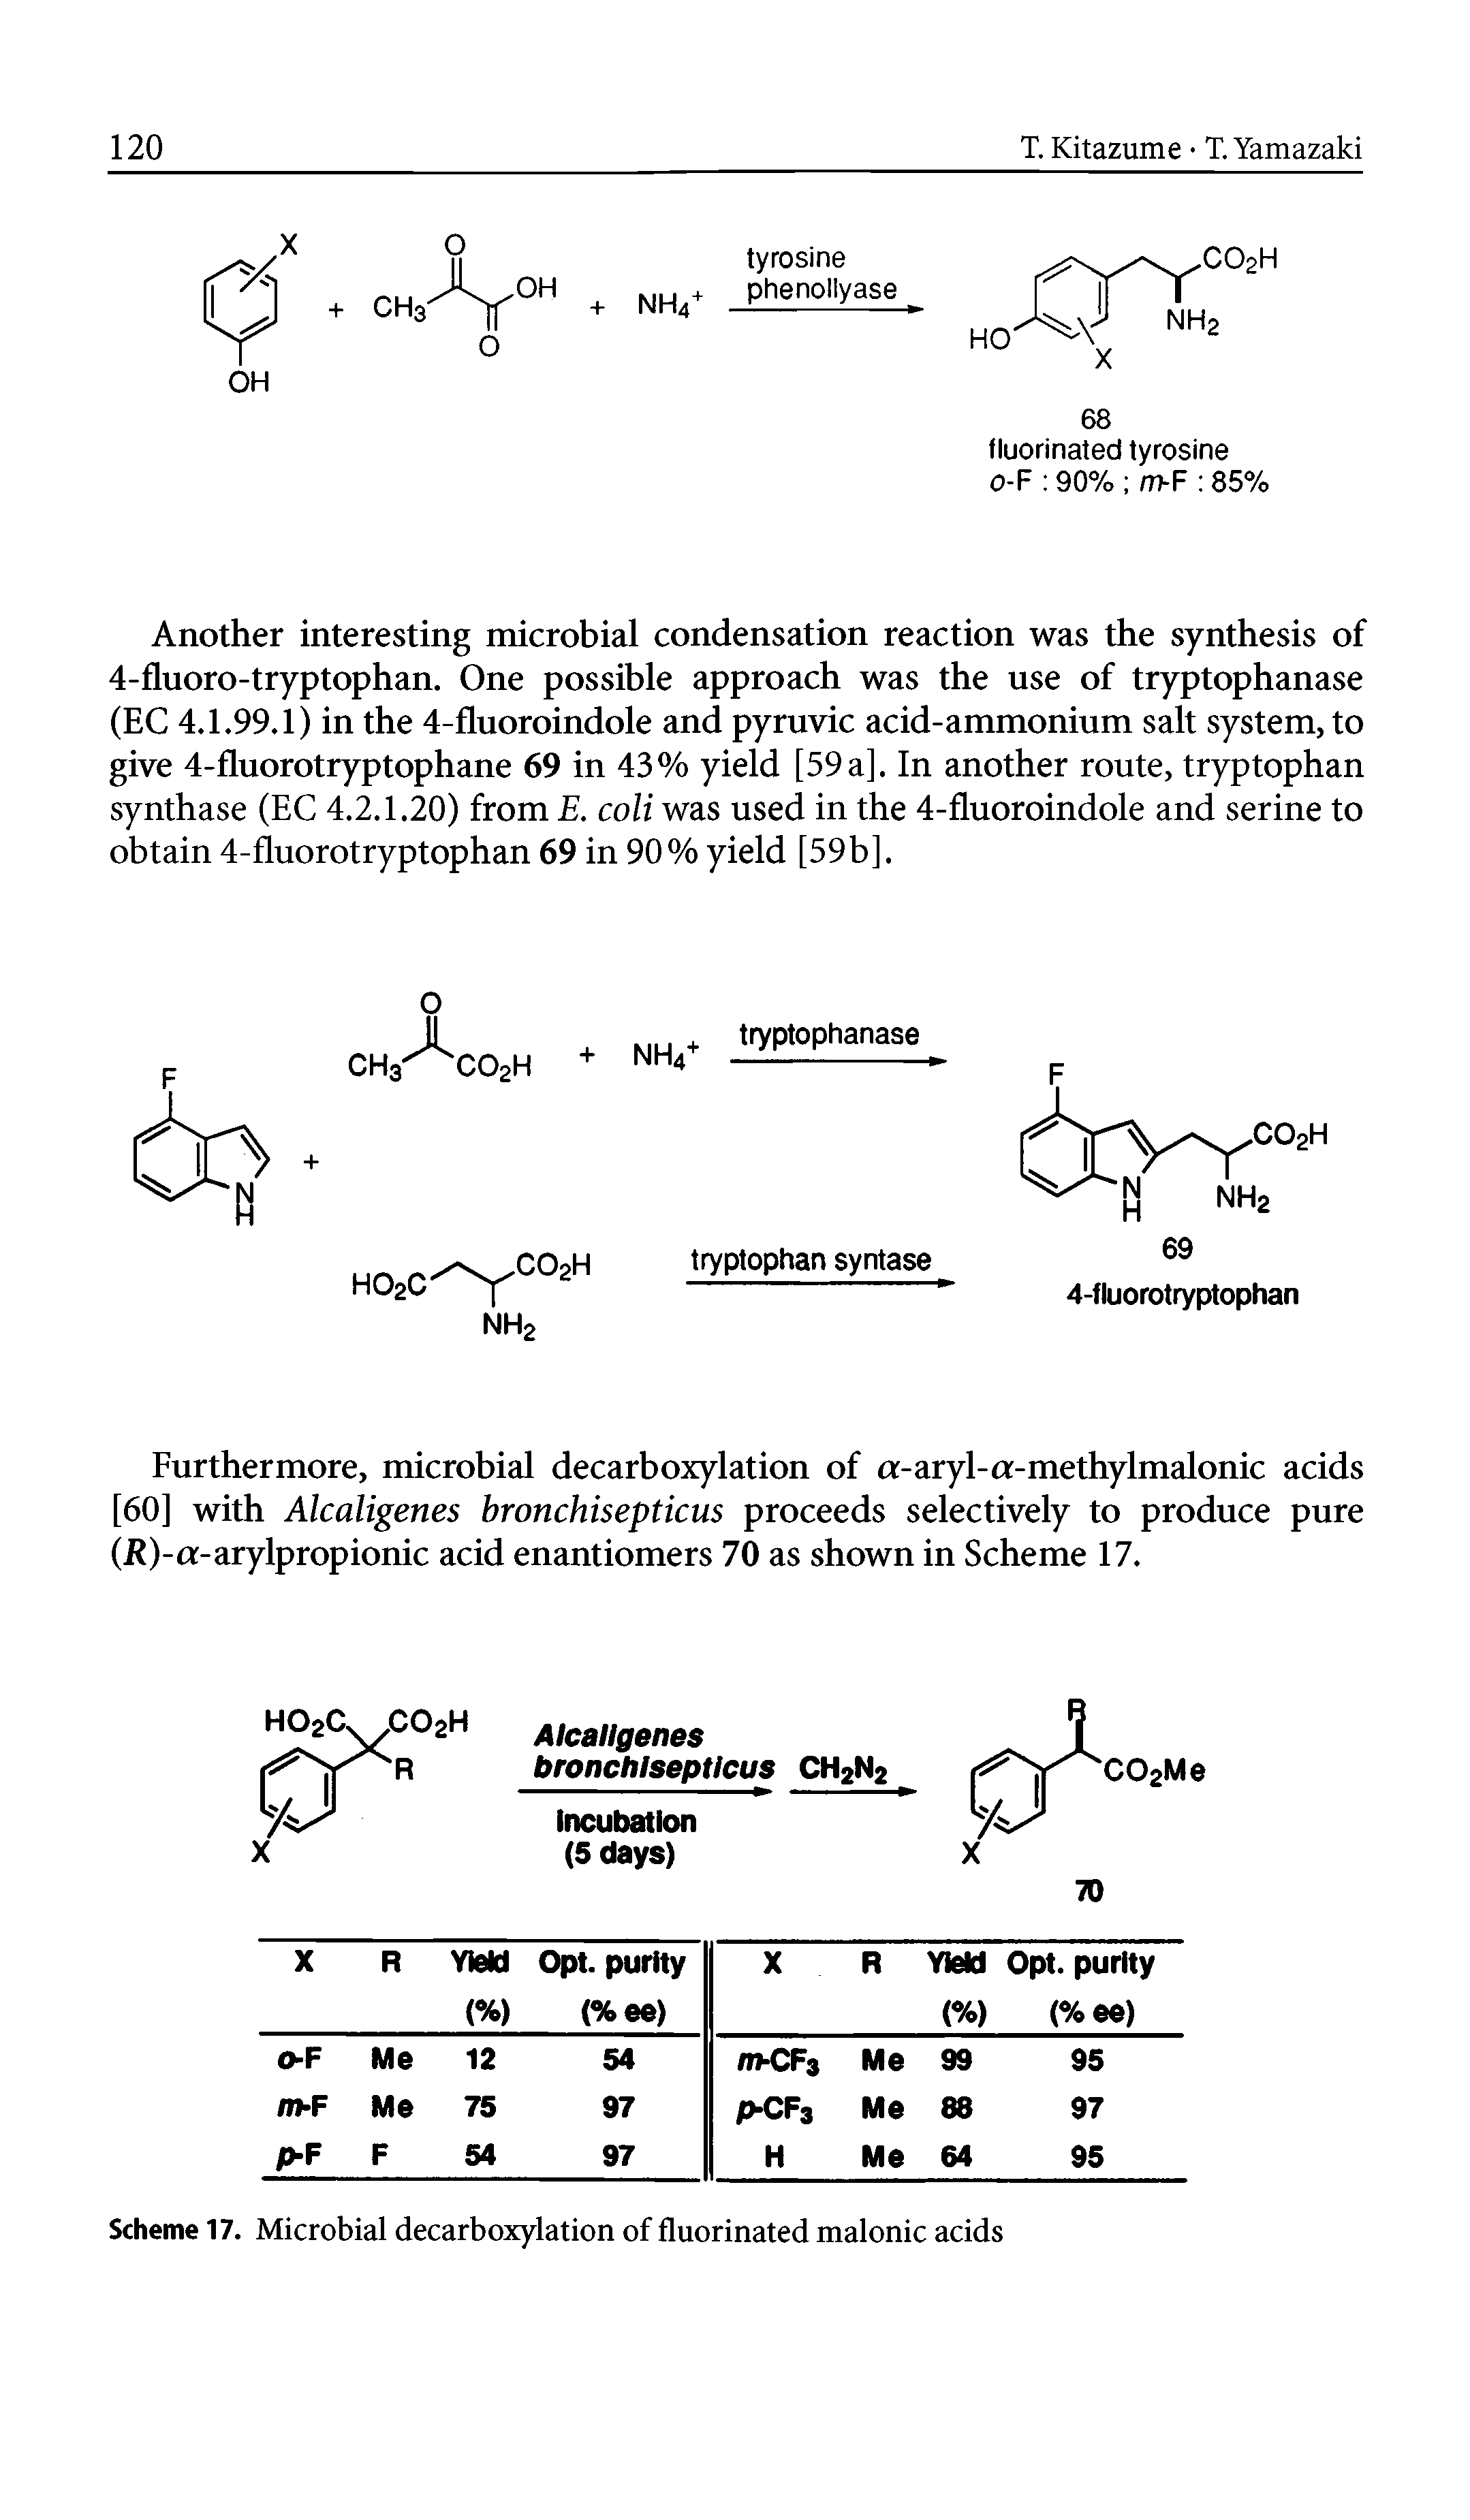 Scheme 17. Microbial decarboxylation of fluorinated malonic acids...